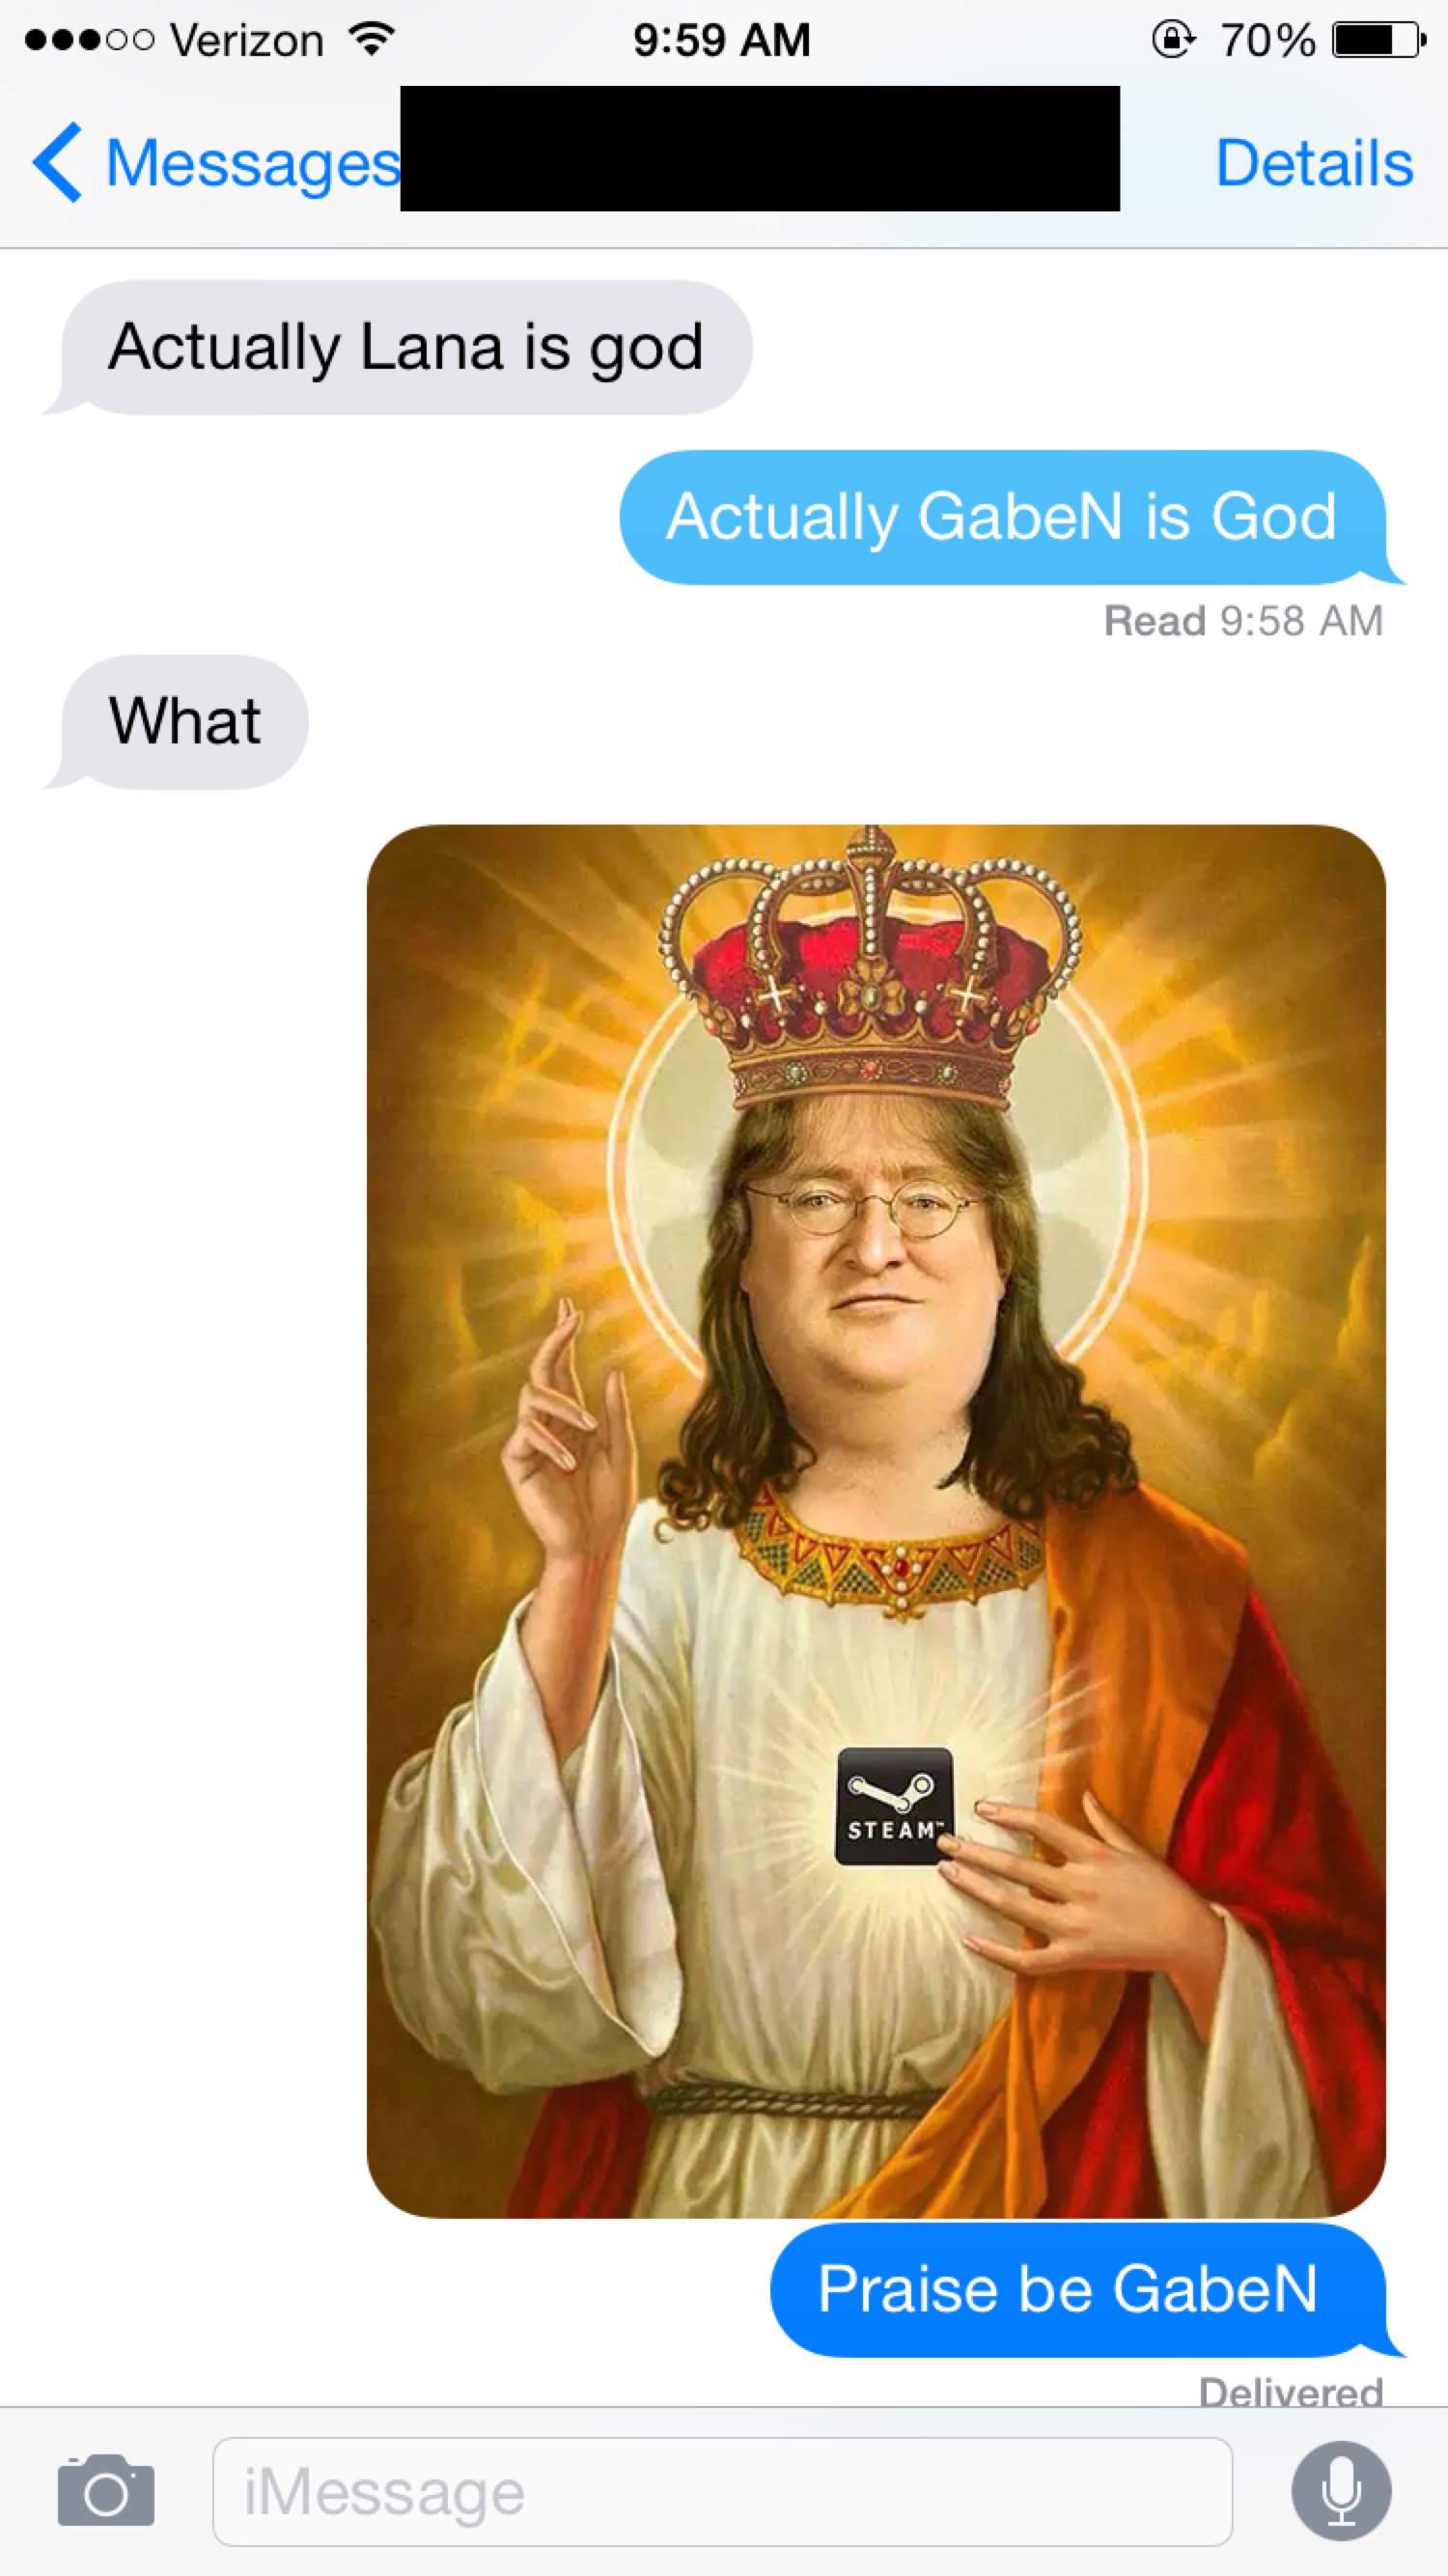 Making the effort to enlighten the girlfriend on who the real god is